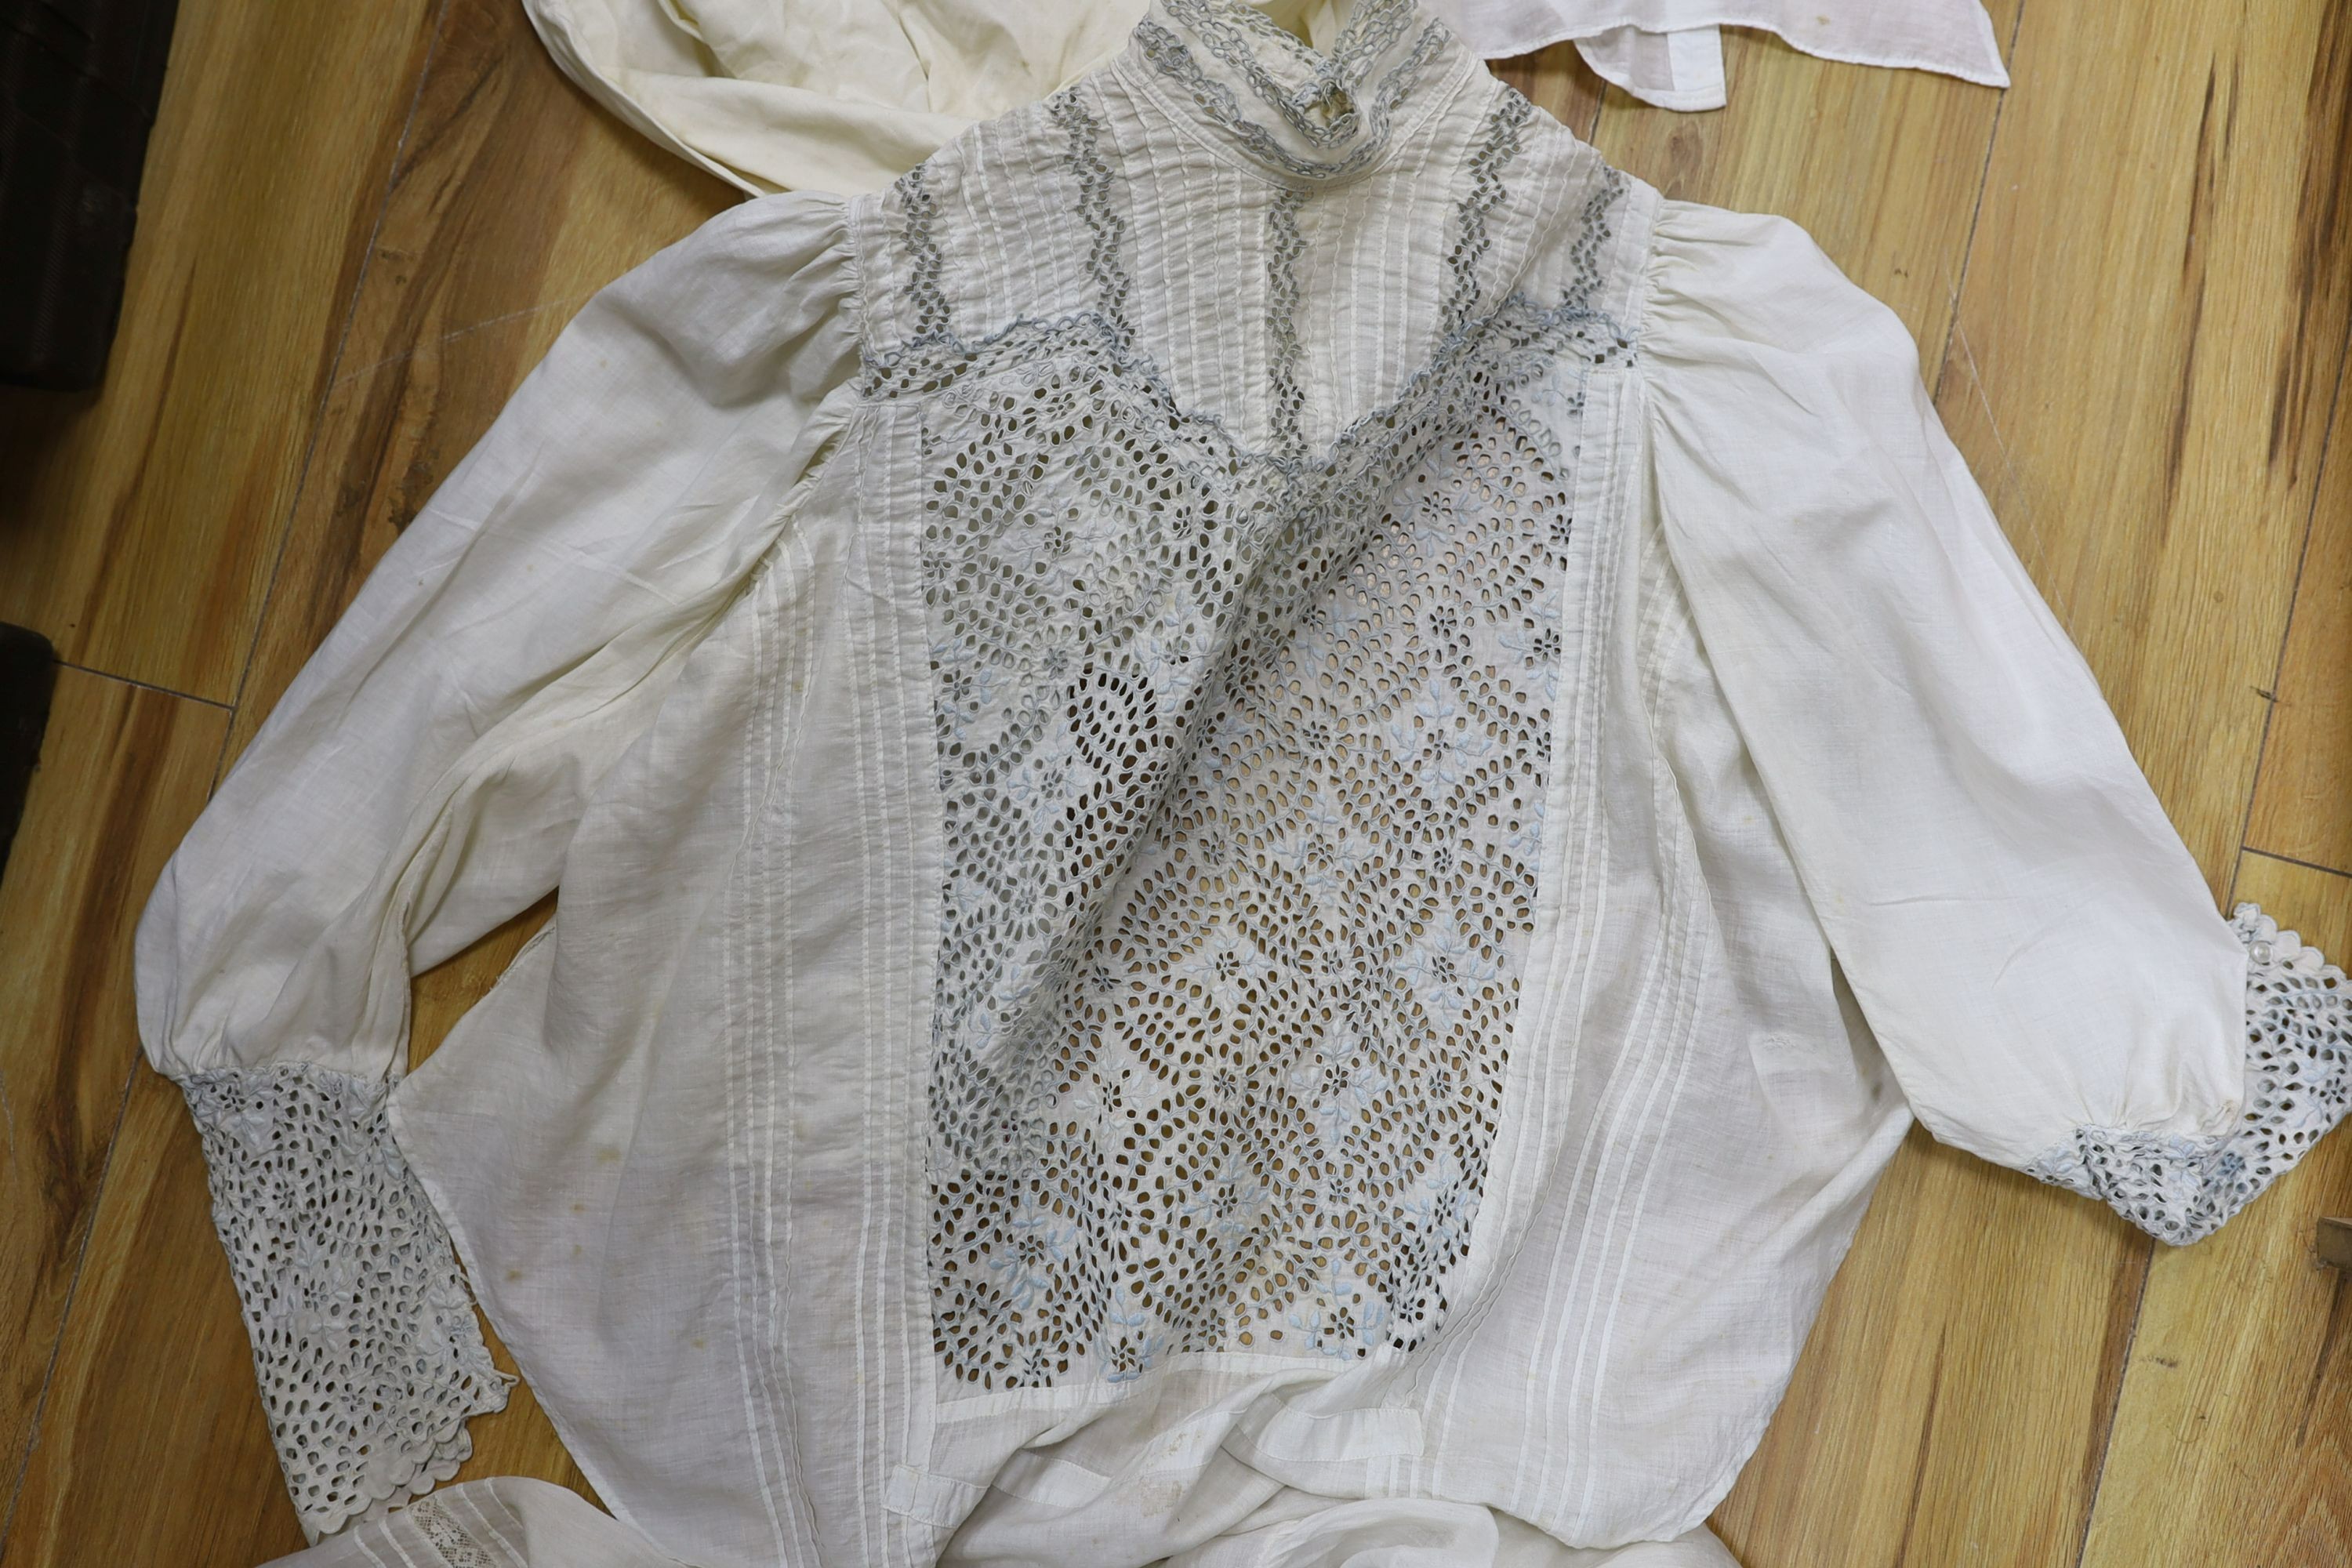 Six Edwardian fine lawn ladies summer blouses with lace and embroidered and pintucked panel and a camisole